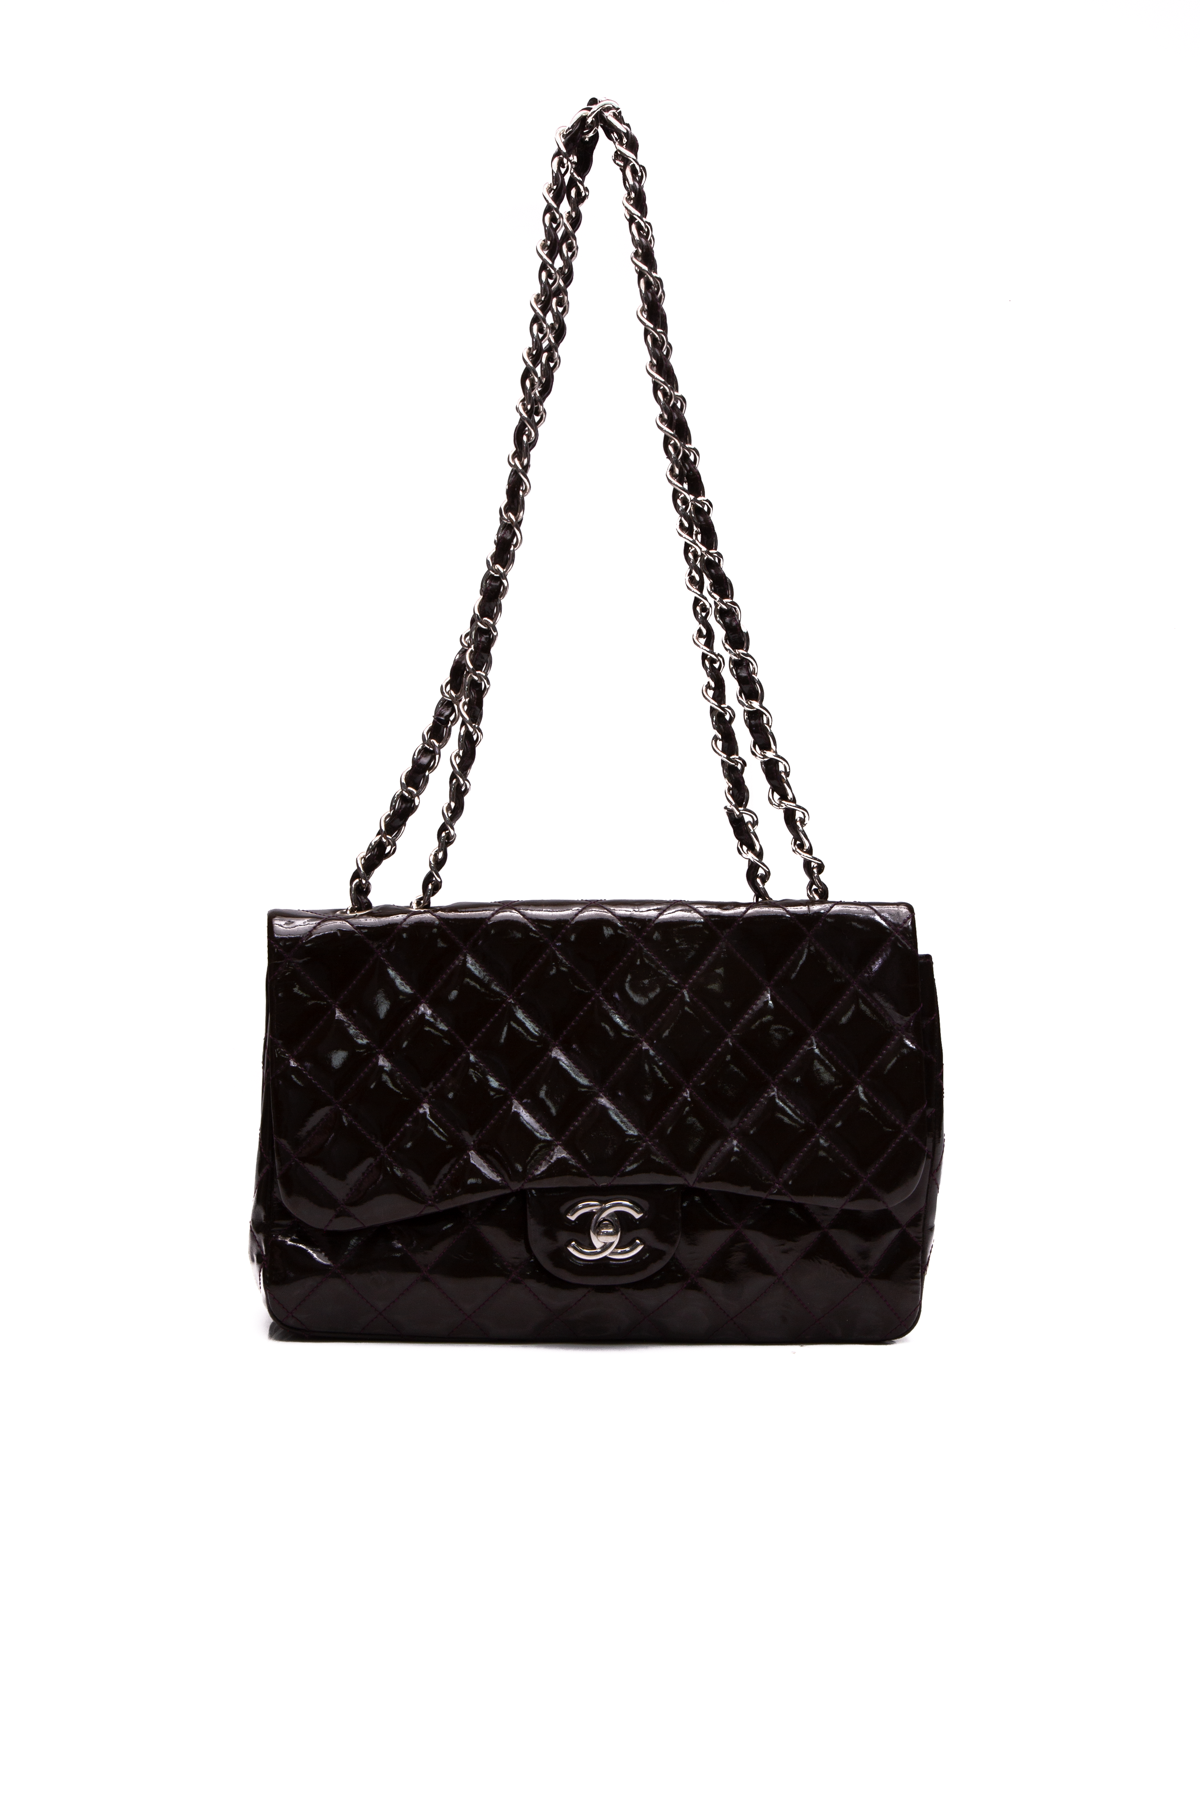 Chanel Red Quilted Caviar Jumbo Classic Single Flap Silver Hardware, 2009-2010 (Very Good), Womens Handbag